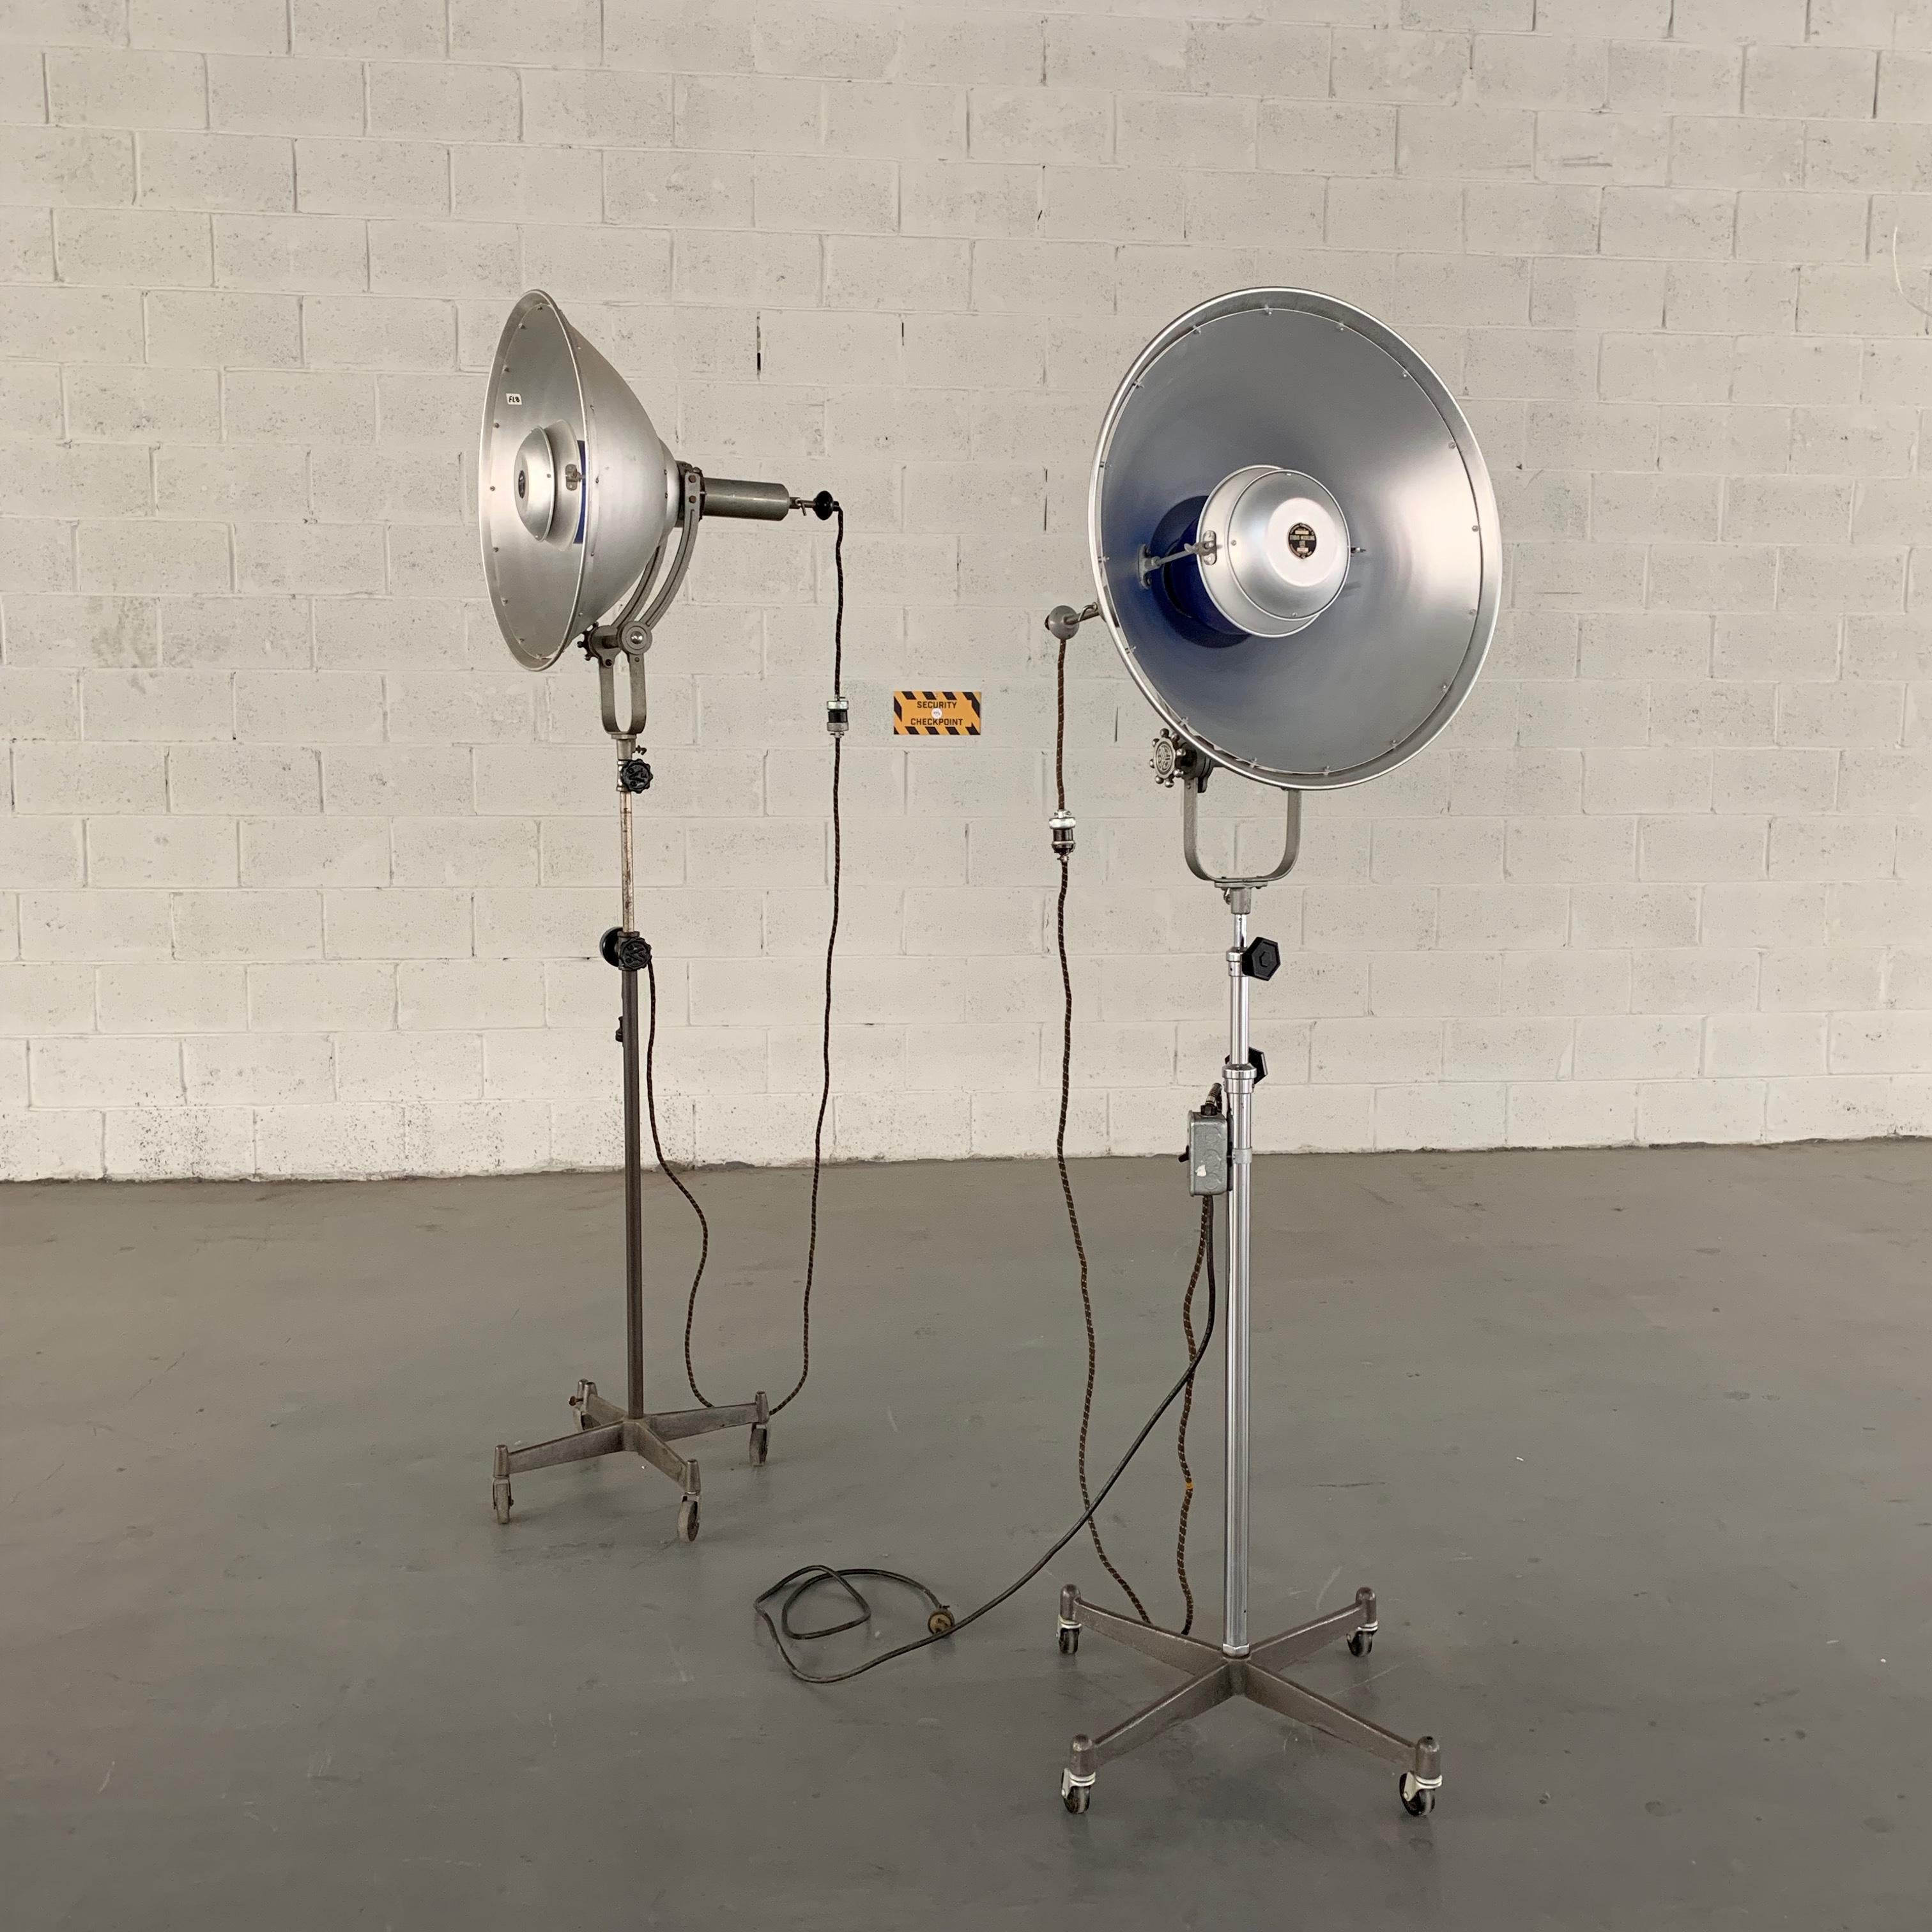 Impressive, Industrial, midcentury, rolling, aluminum, “Studio Modeling Lite” photography lamp features a height adjustable stem from 69 -96 inches tall and articulating, 24 inch diameter shades with diffuser. The lamp can accept up to a 300 watt